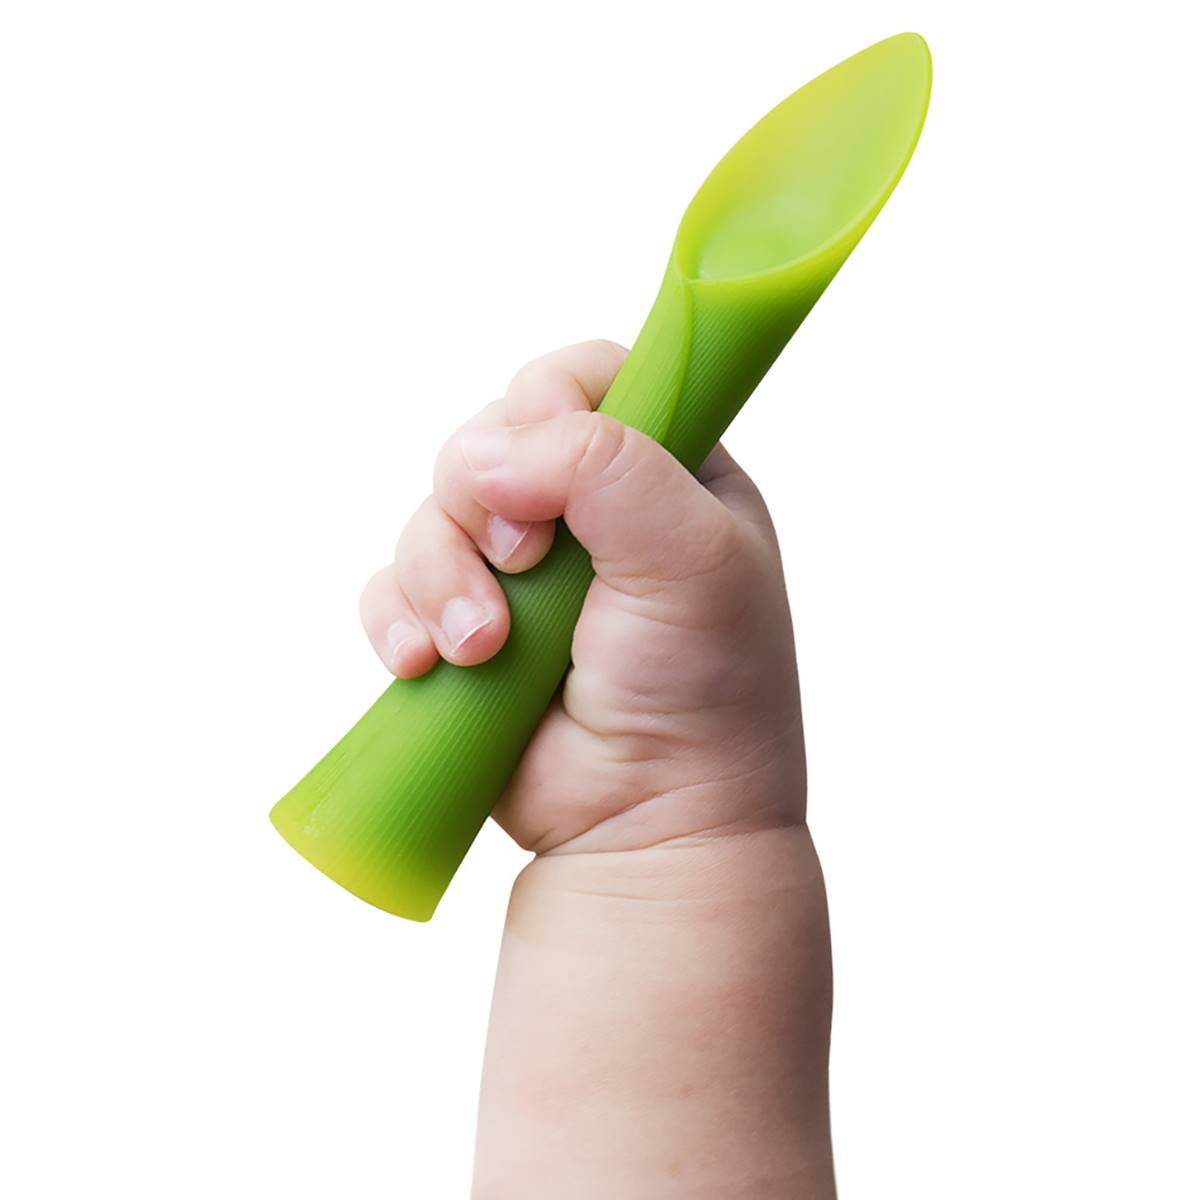 Olababy 2pk. Silicone Training Spoons